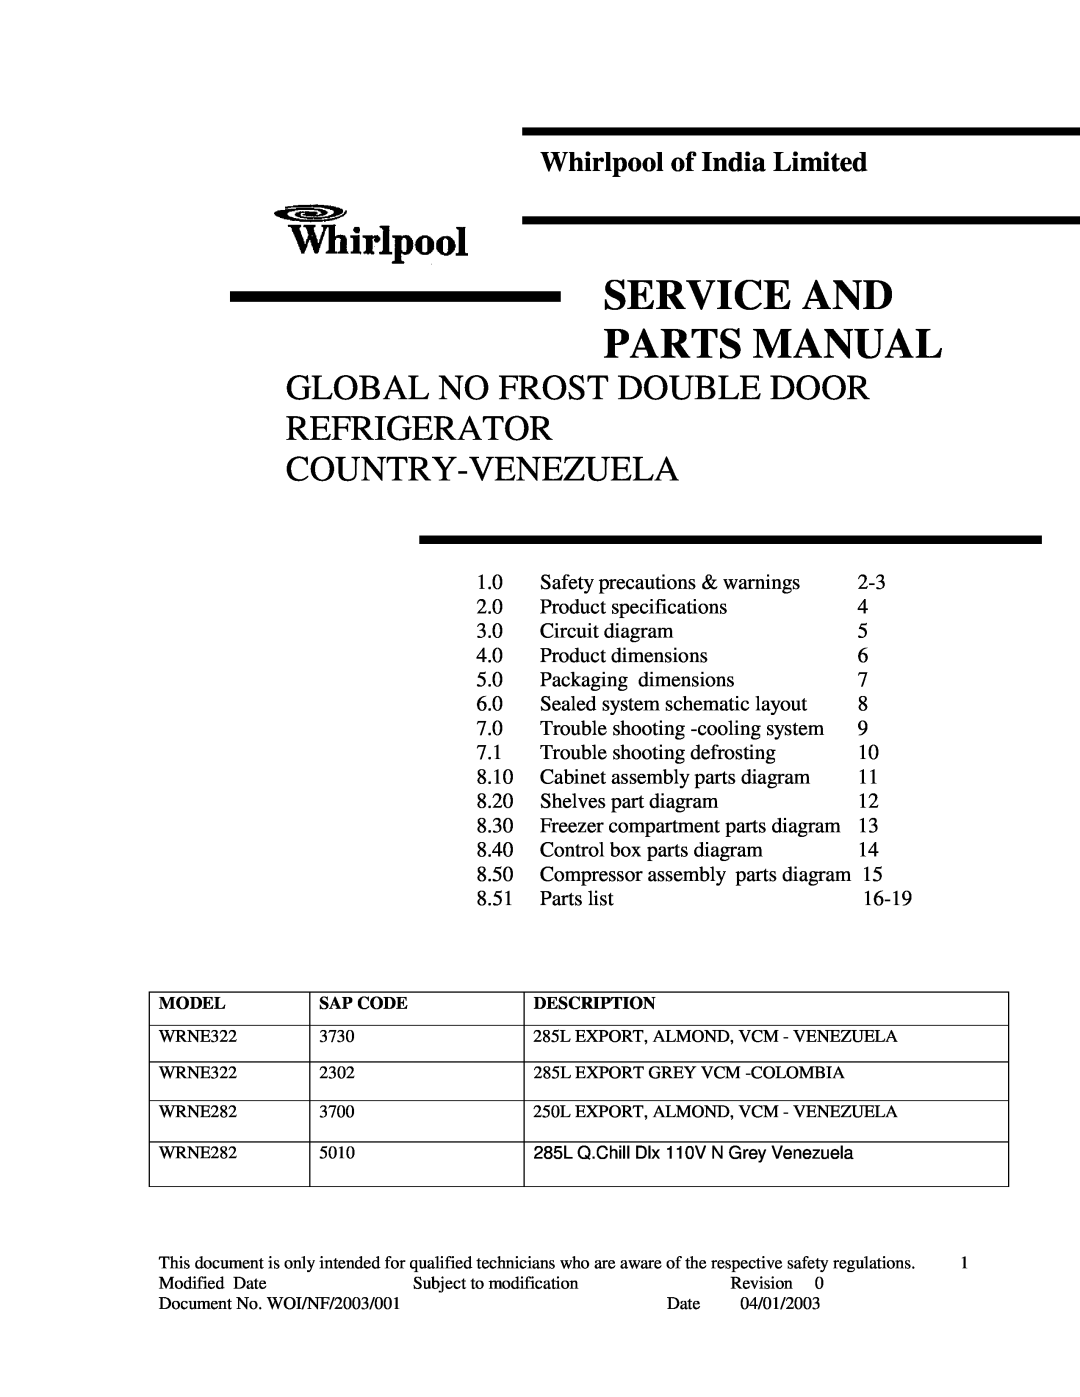 Whirlpool WRNE322 specifications Whirlpool of India Limited, Service And Parts Manual 